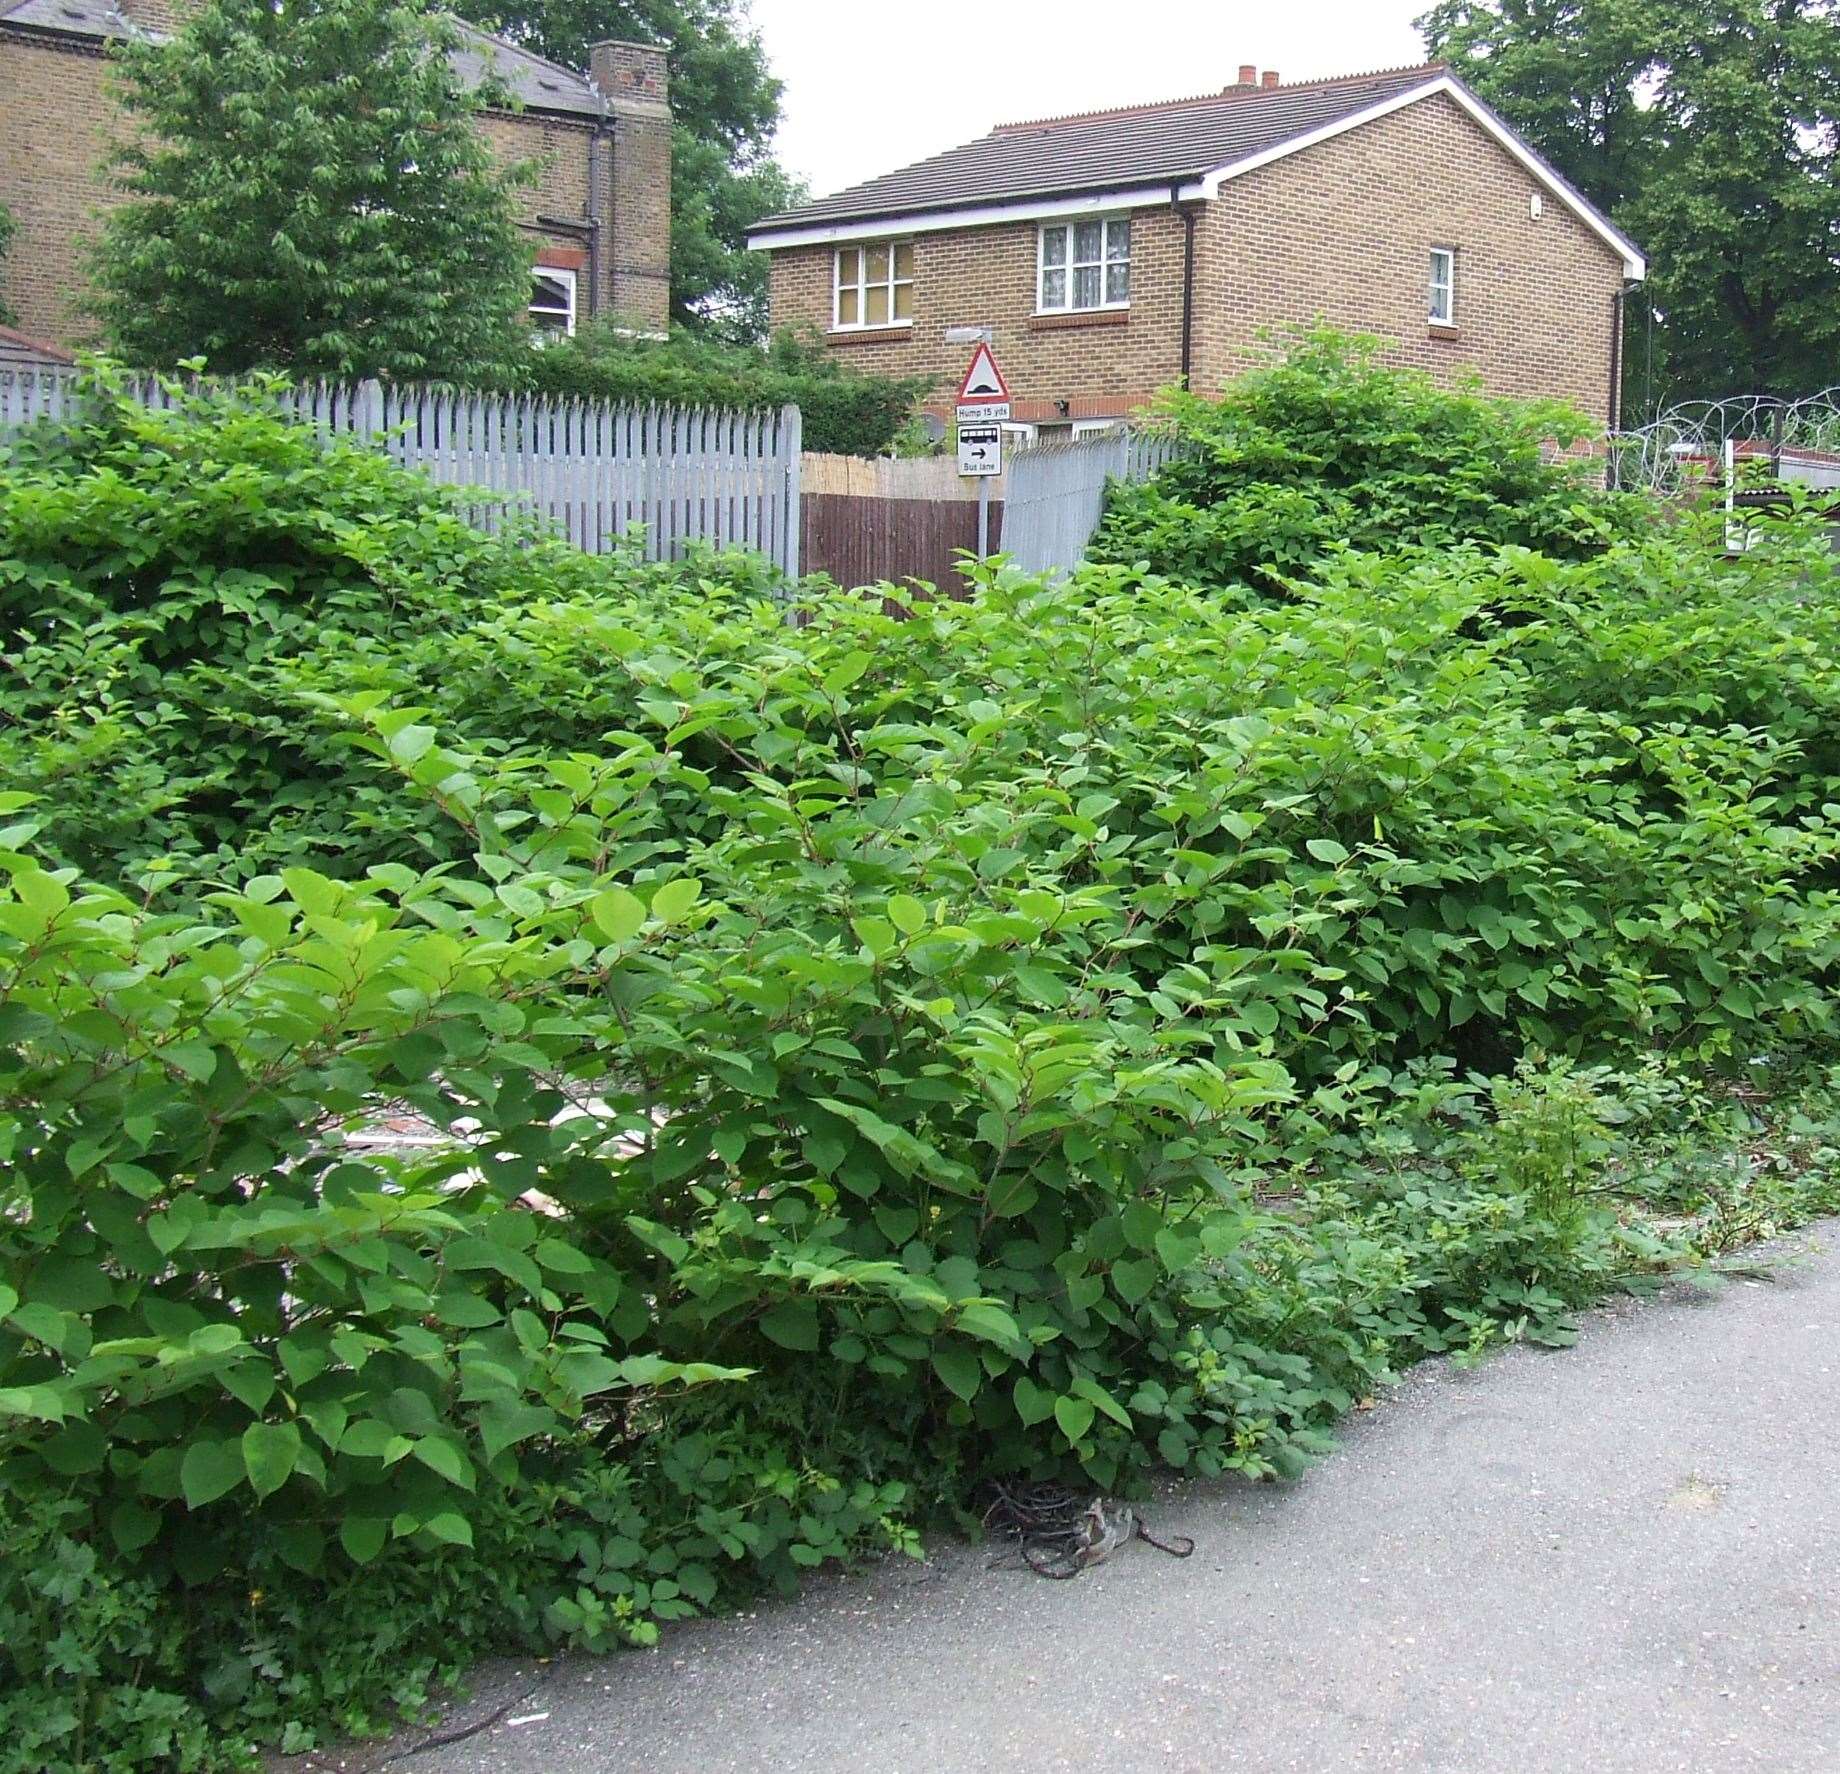 Japanese knotweed growing unchecked. Picture Environet